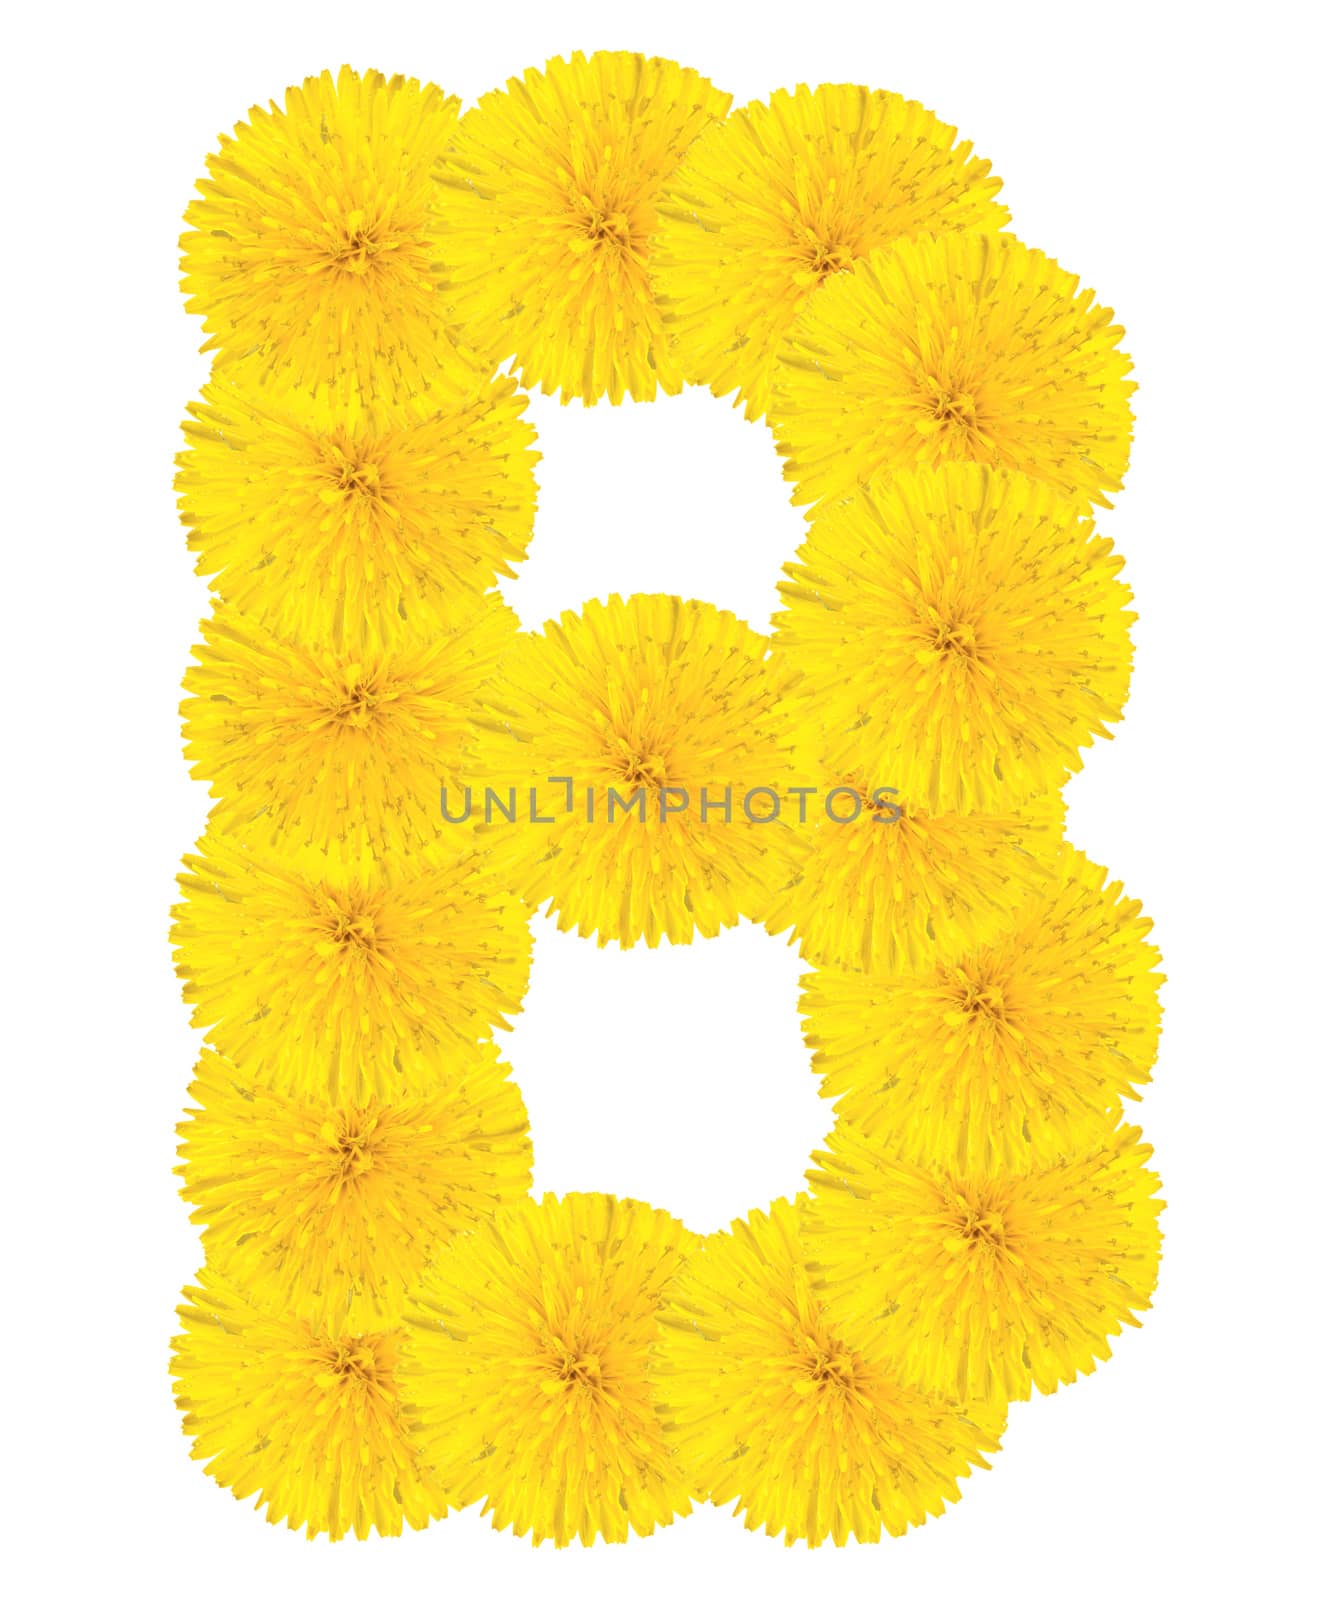 Letter B made from dandelion flowers isolated on white background